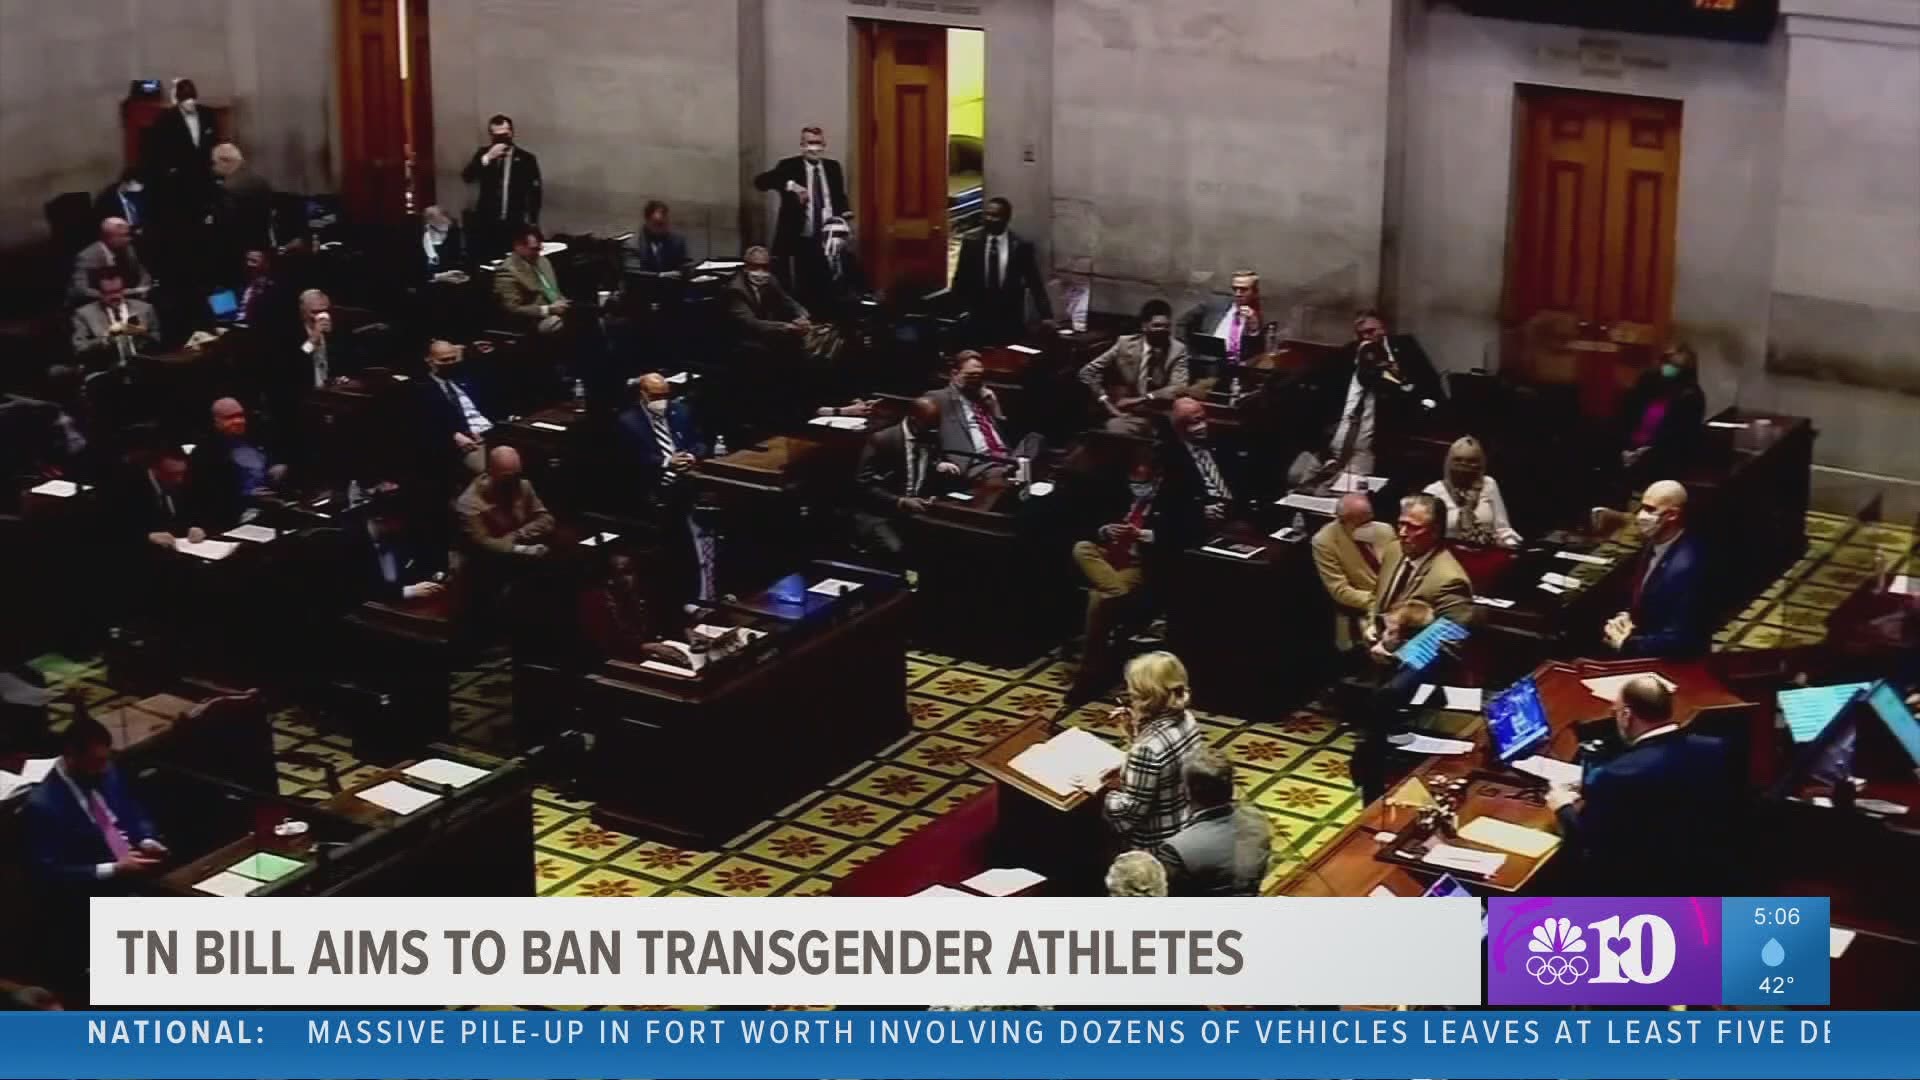 A bill in the state legislature aims to prohibit transgender girls from playing on middle and high school girls' sports teams.